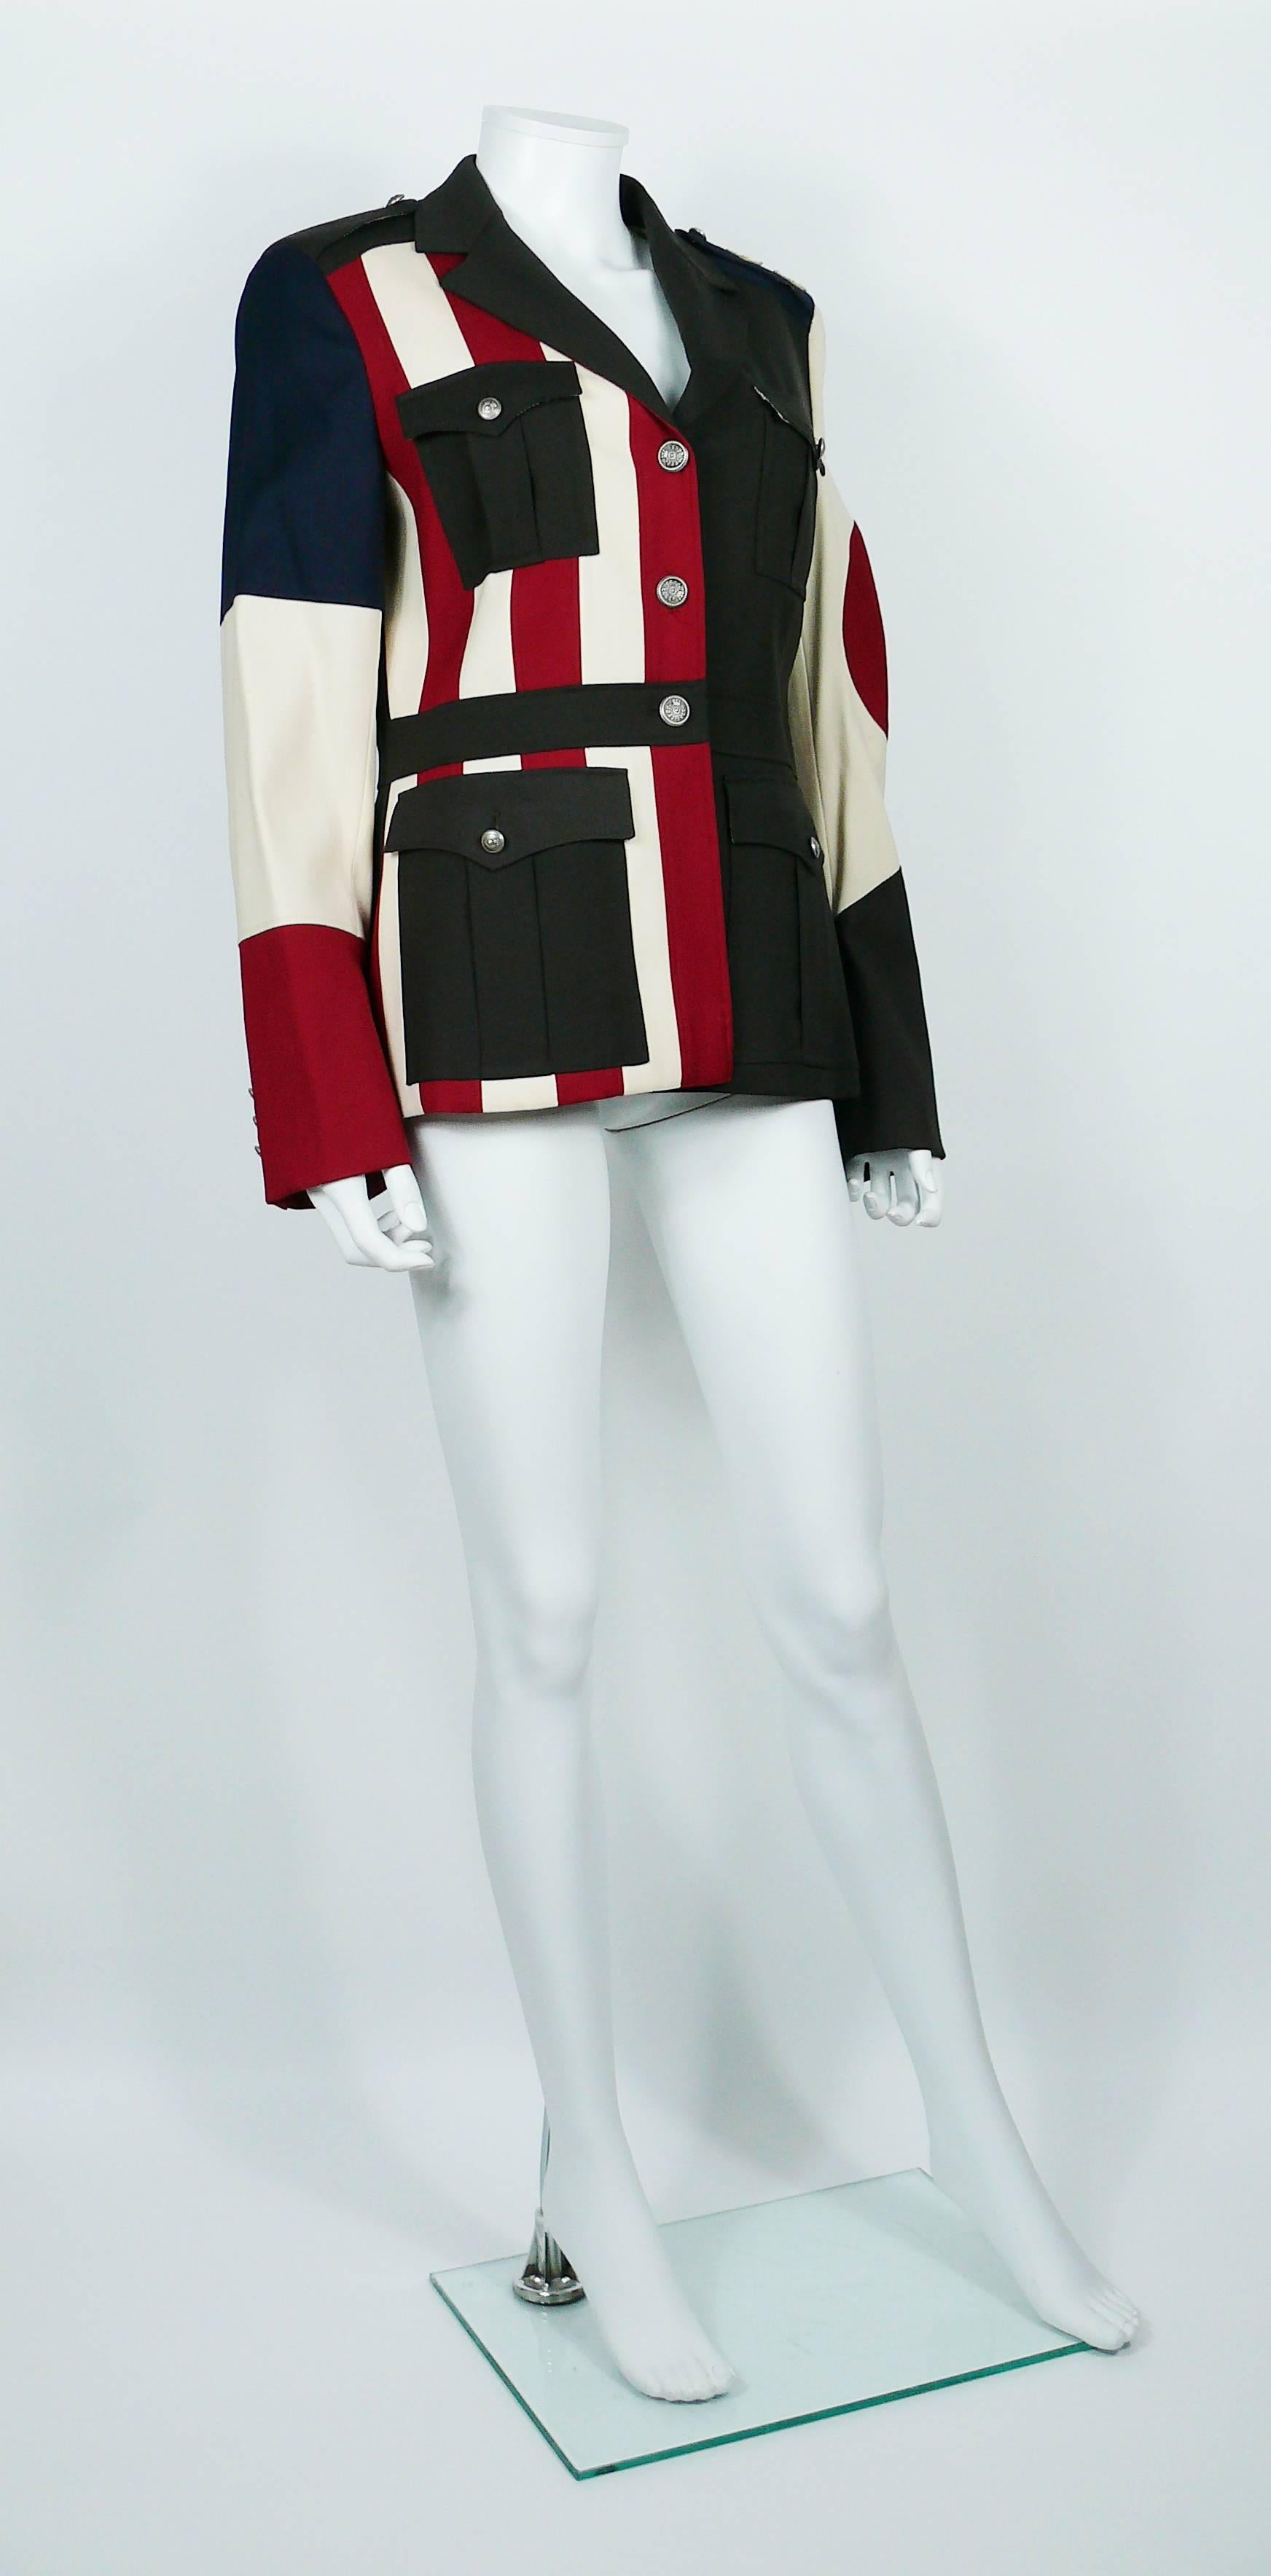 MOSCHINO military style jacket featuring a multicolored flag patchwork.

This jacket features :
- Long sleeves.
- Fully lined.
- Shoulder pads.
- 4 front pockets.
- Silver toned with antique patina buttons.
- Gold toned stars appliqués on one